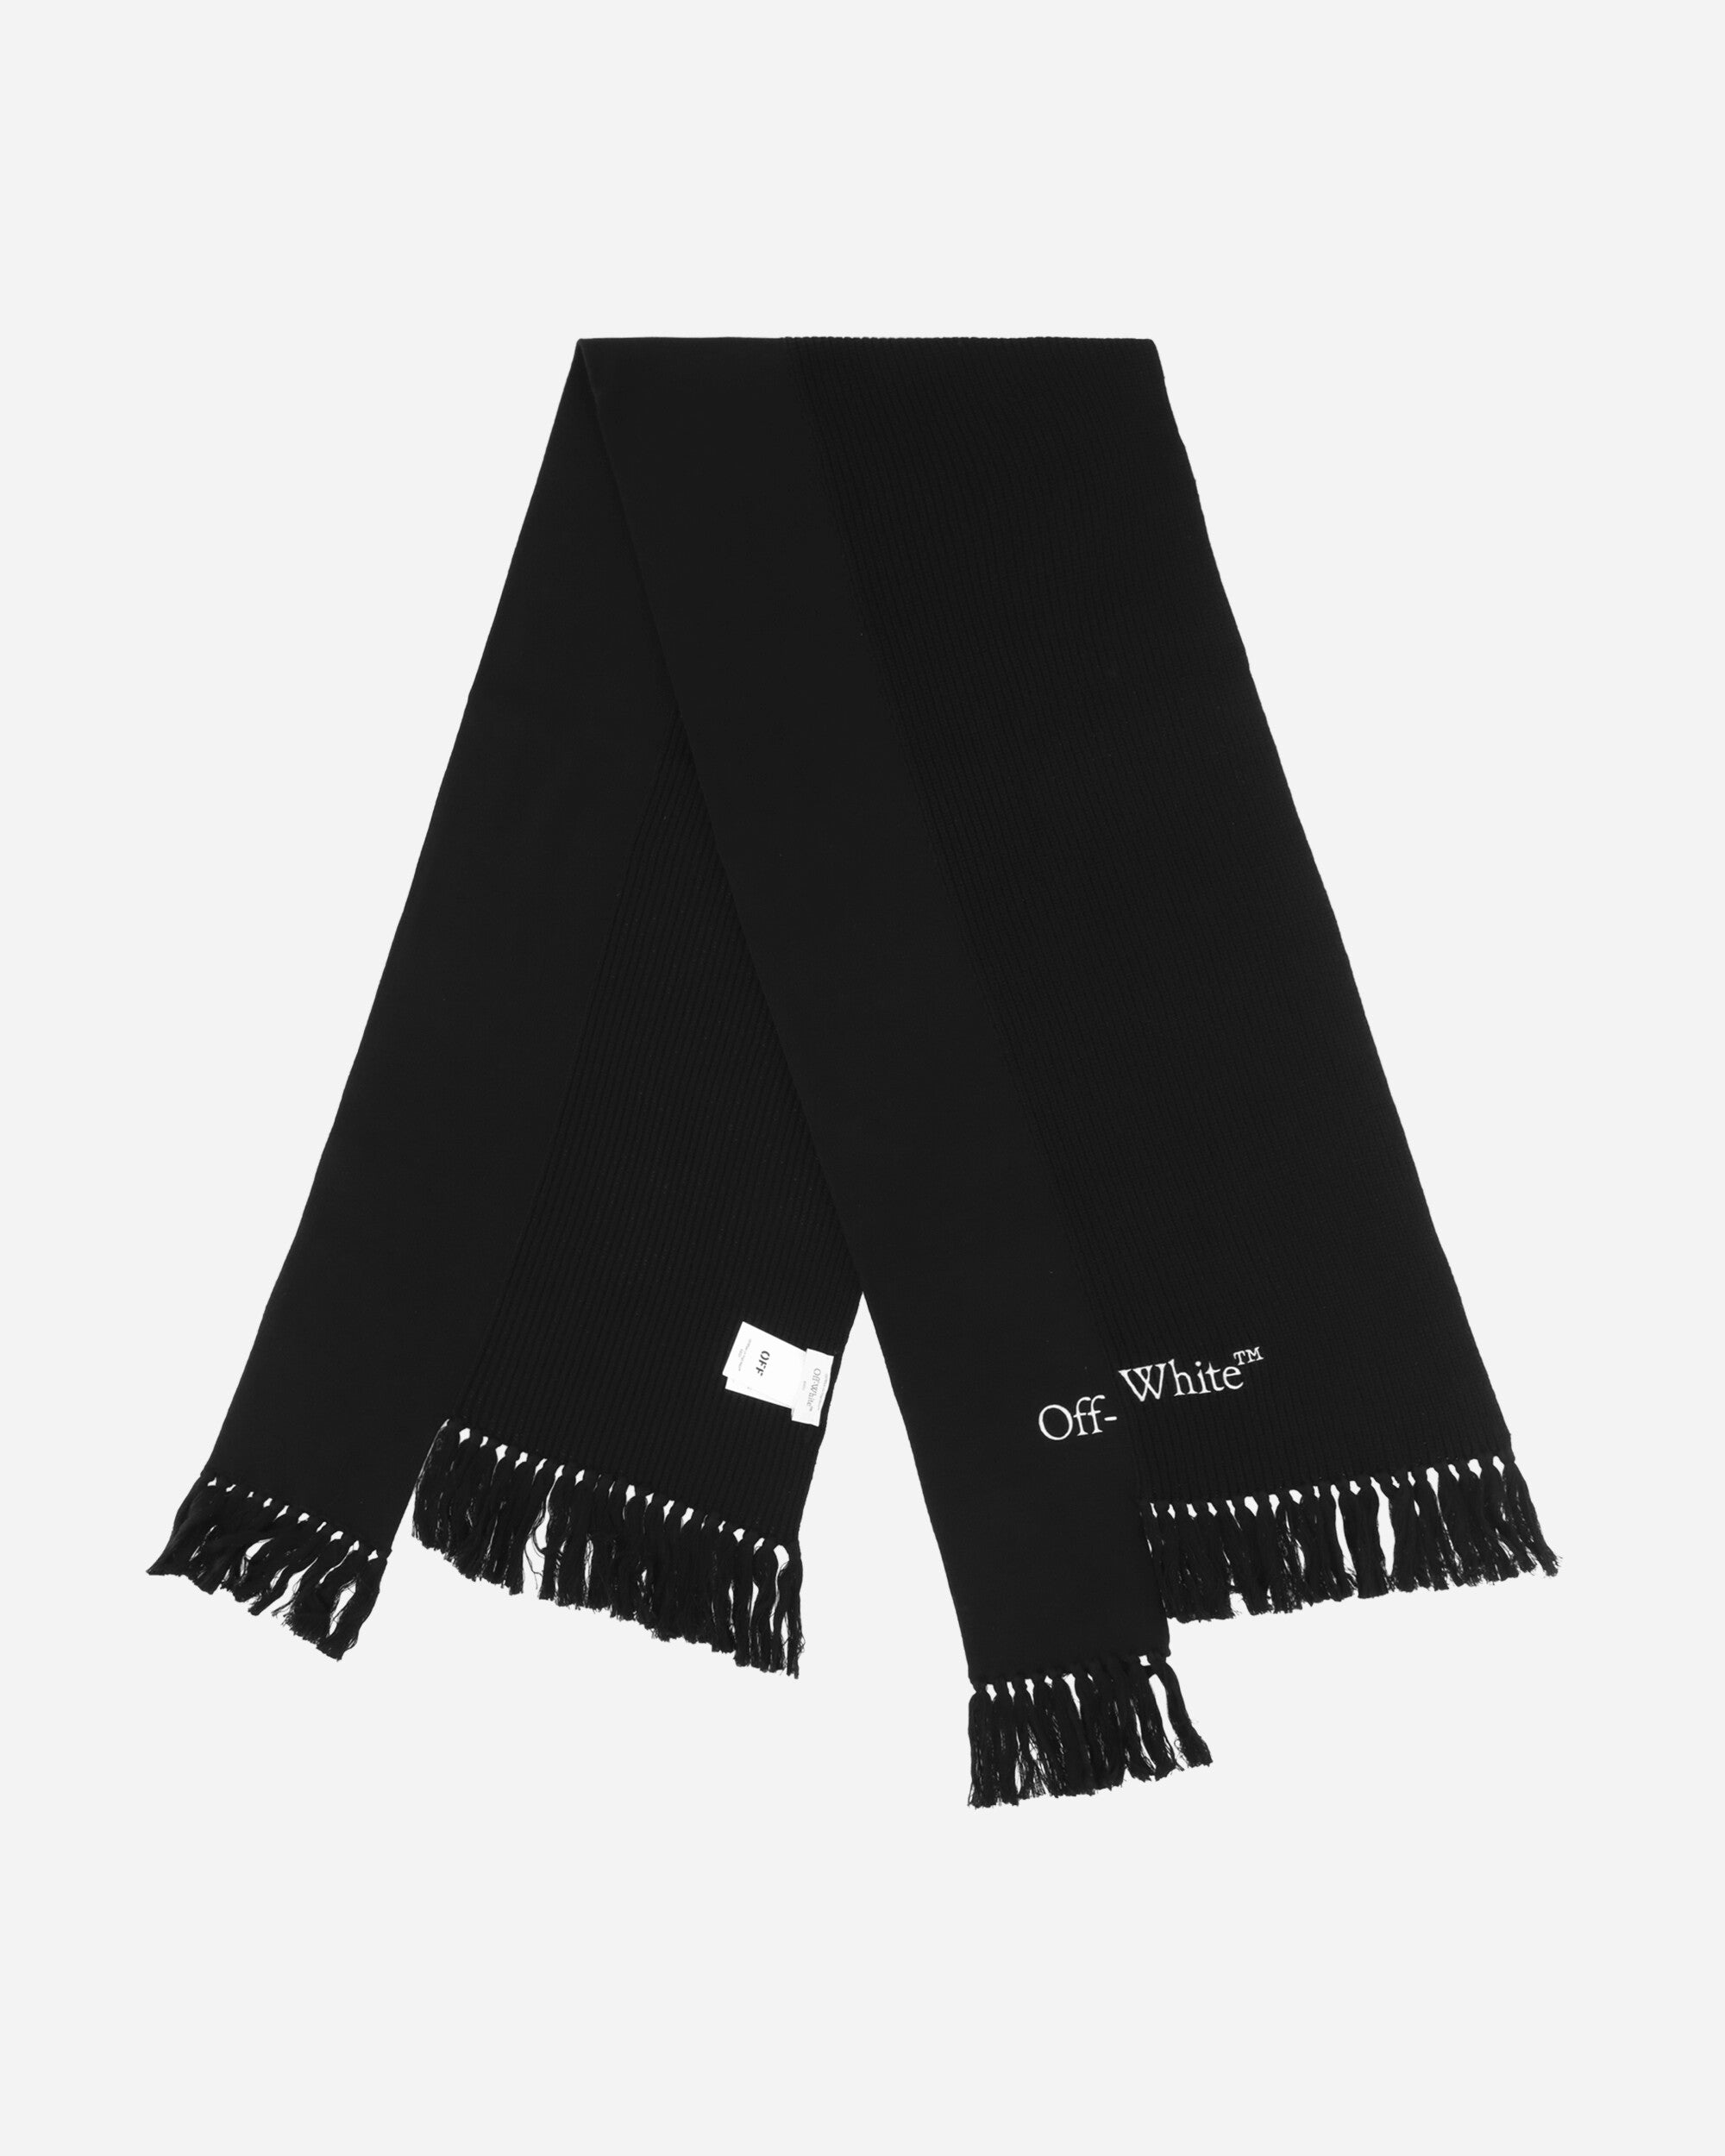 Off-White Glitch Bookish Knit Scarf Black/White Gloves and Scarves Scarves and Warmneck OMMA051F23KNI001 1001